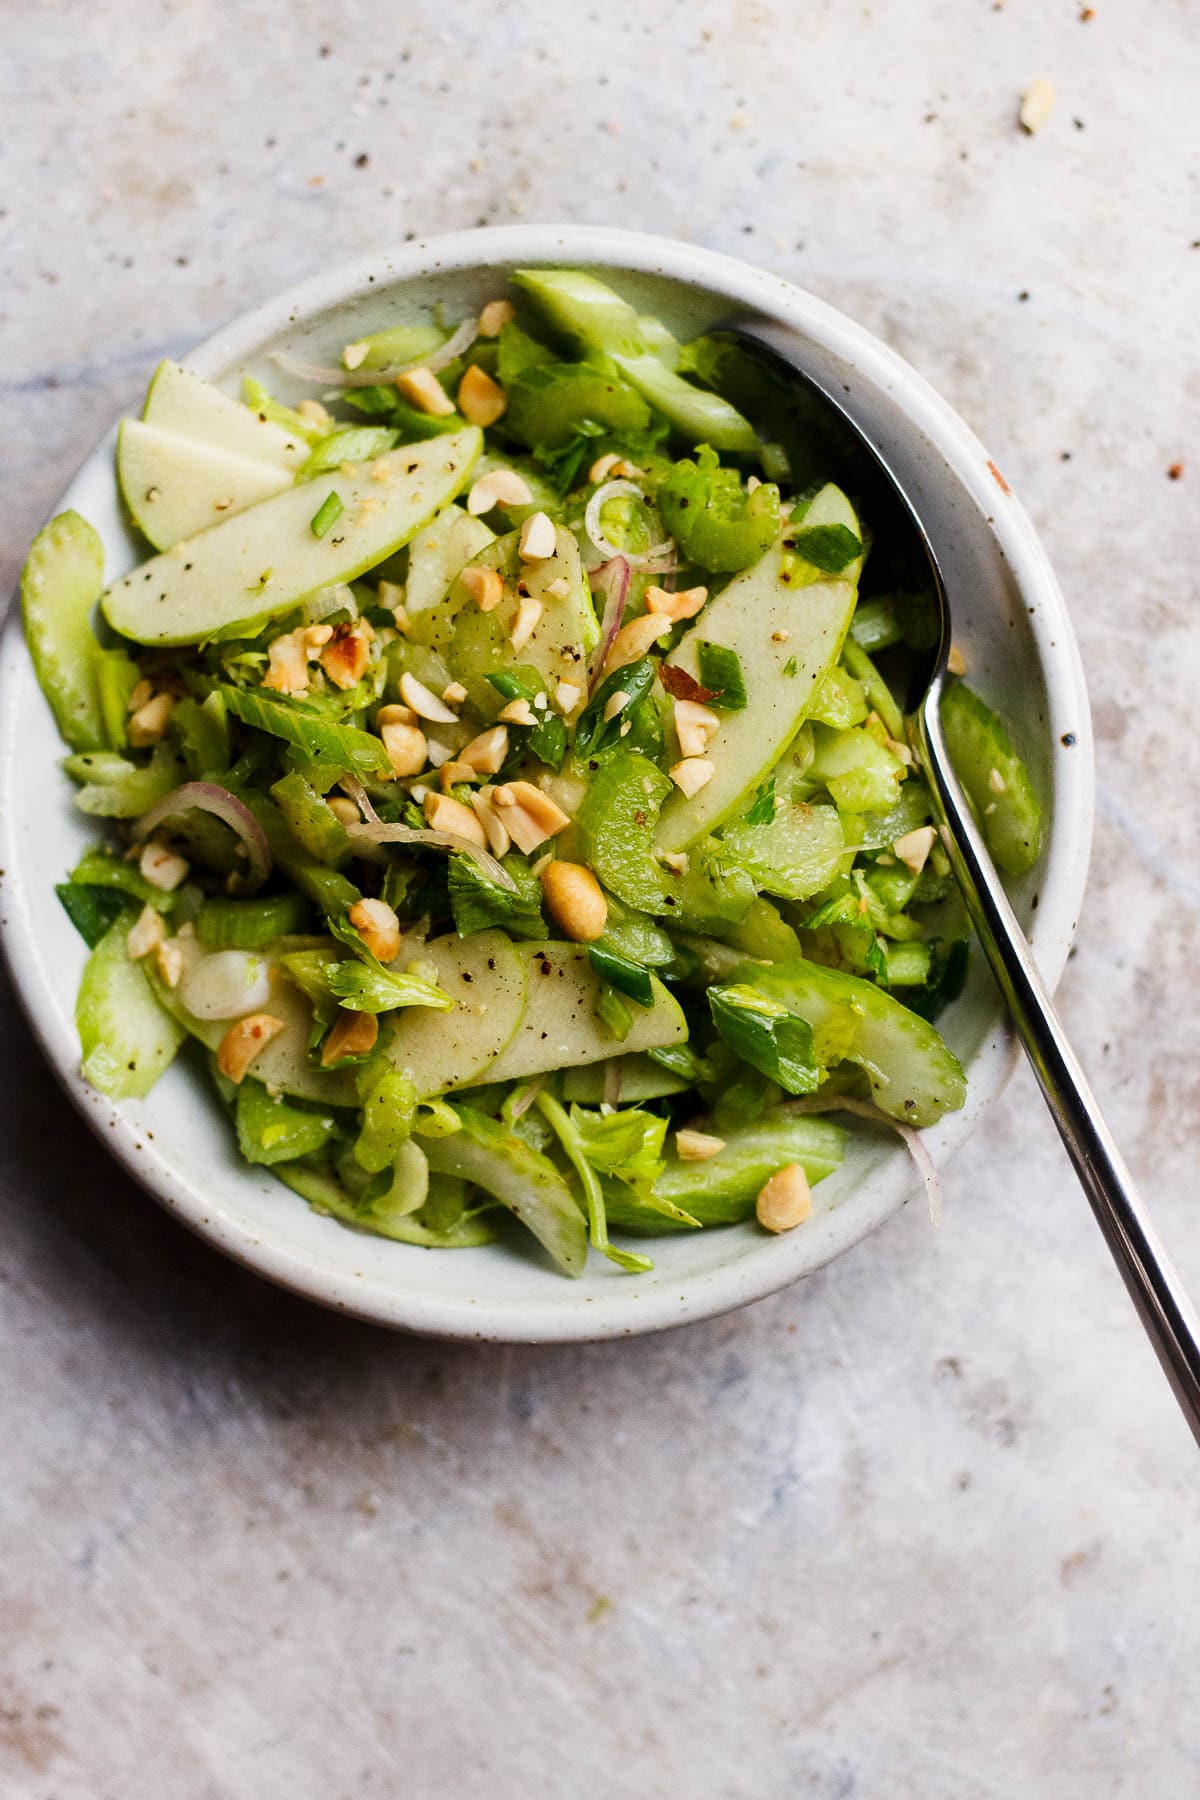 apple salad with celery and peanuts